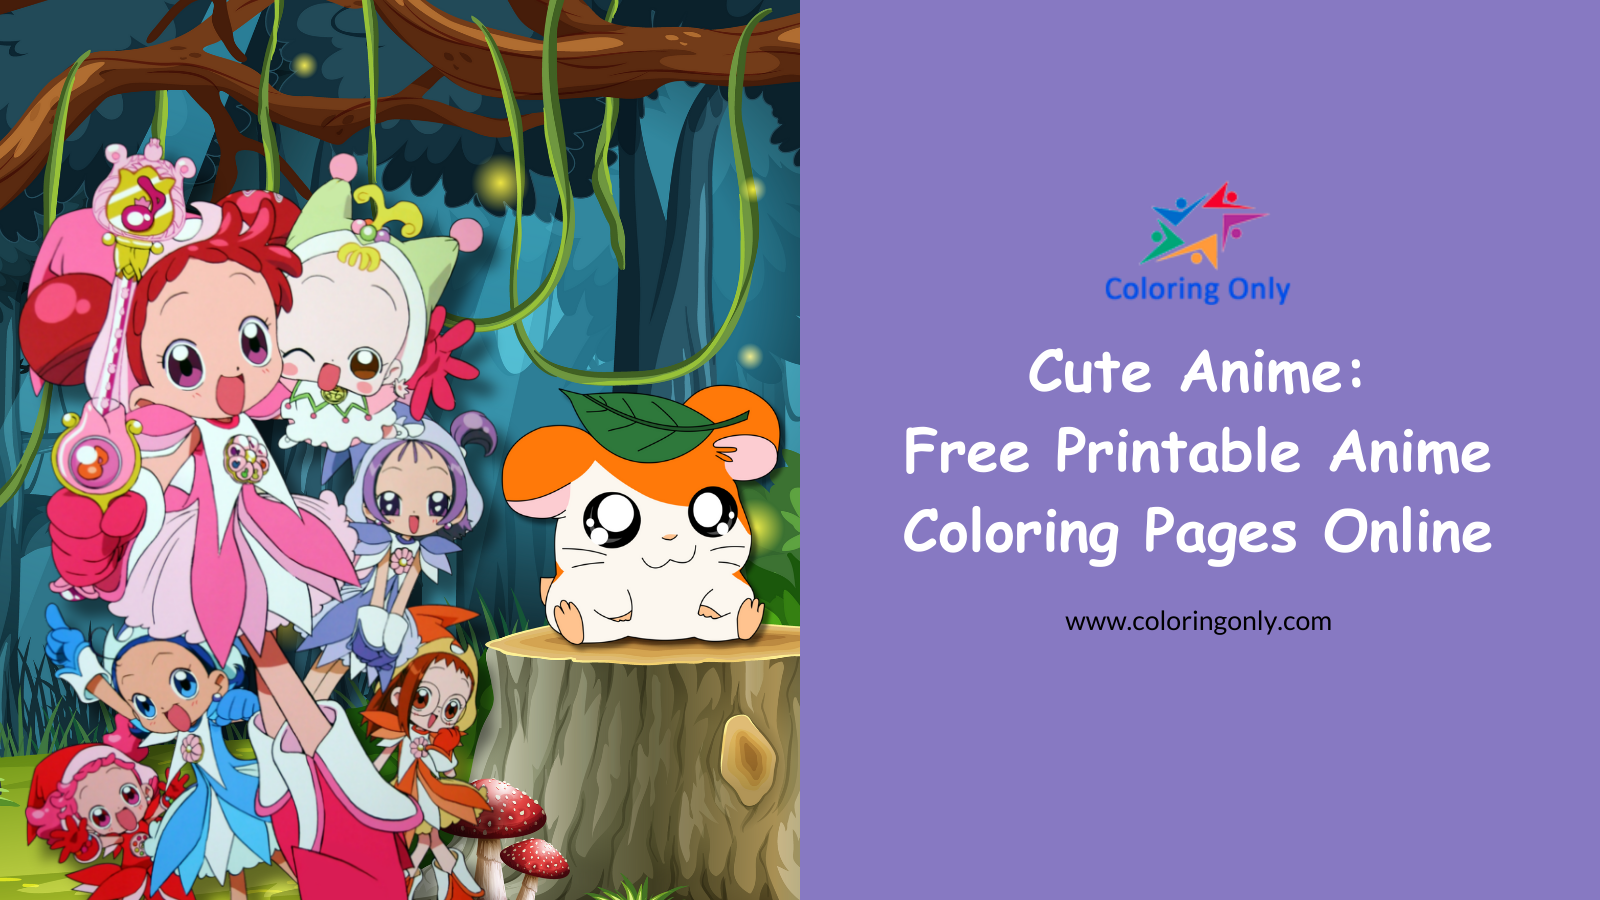 Cute Anime: Free Printable Anime Coloring Pages Online